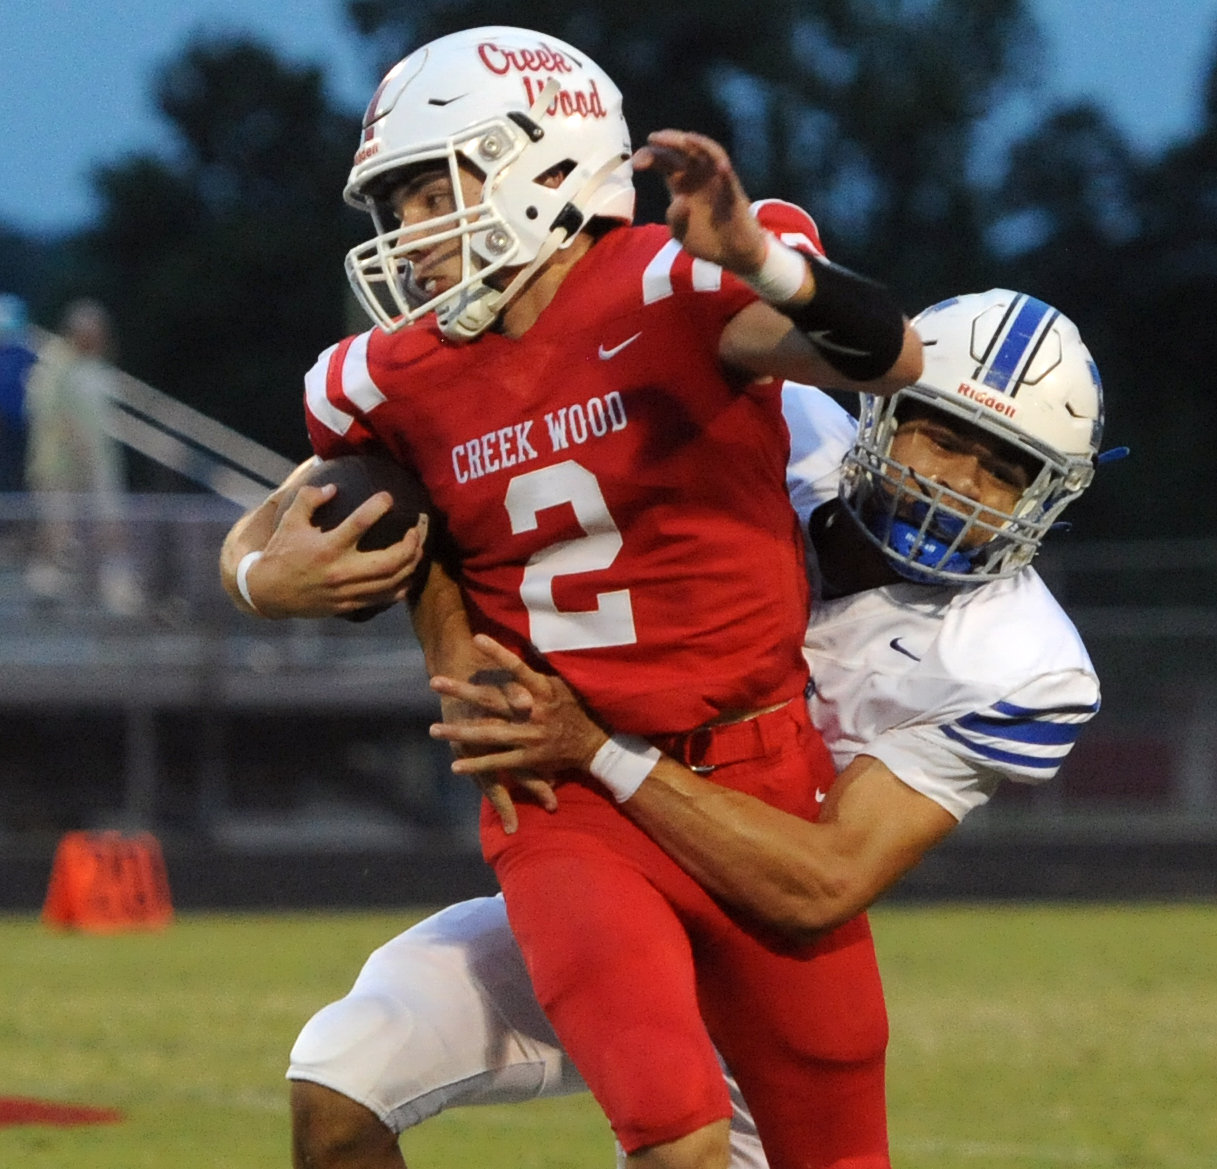 Darien Crenshaw wraps up Red Hawk quarterback Eathon Donaldson for a tackle for loss against Creek Wood on Friday.